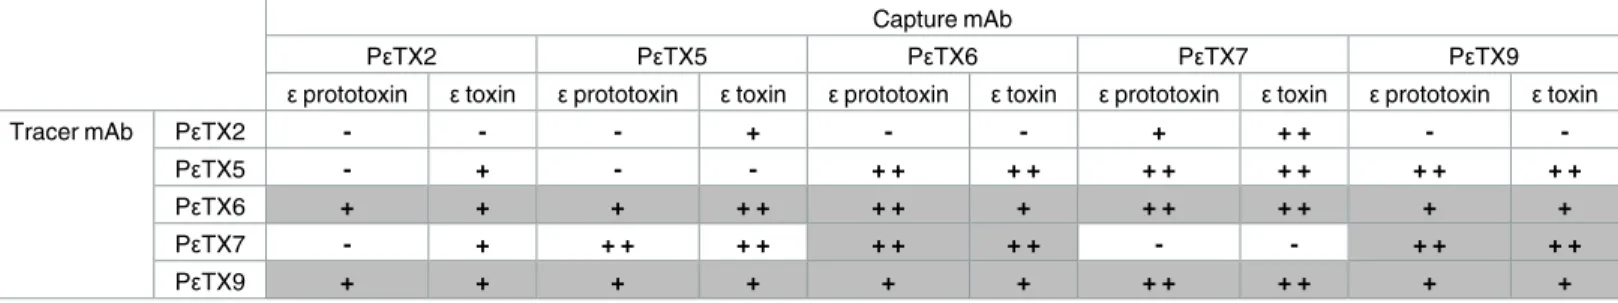 Table 4. Signals obtained for all combinations of mAbs used as capture and tracer antibodies in an immunochromatographic assay format.